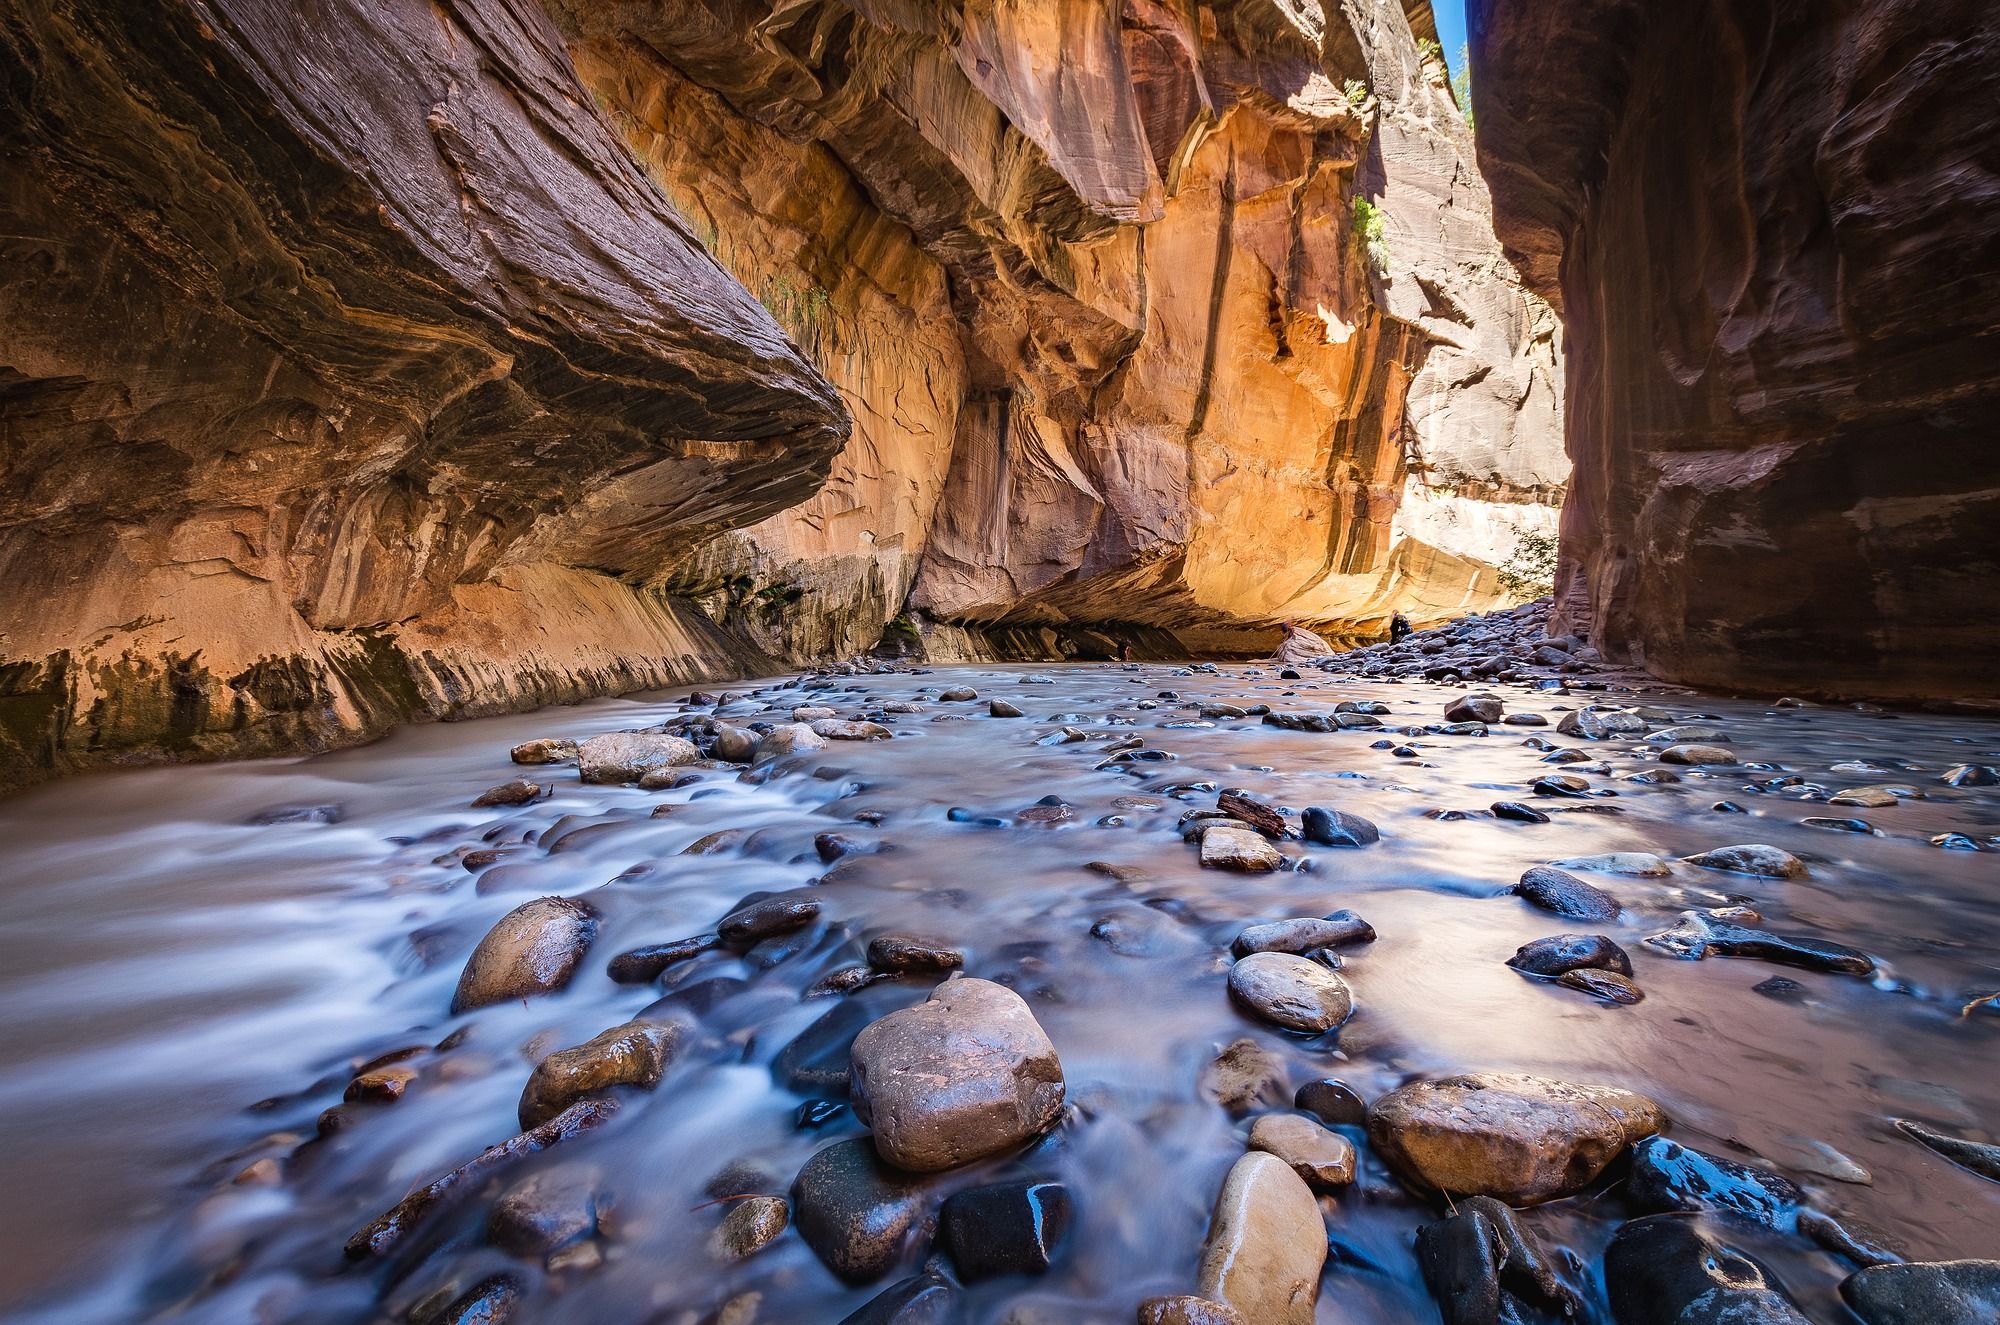 Road trip #4: Zion National Park (The Narrows)